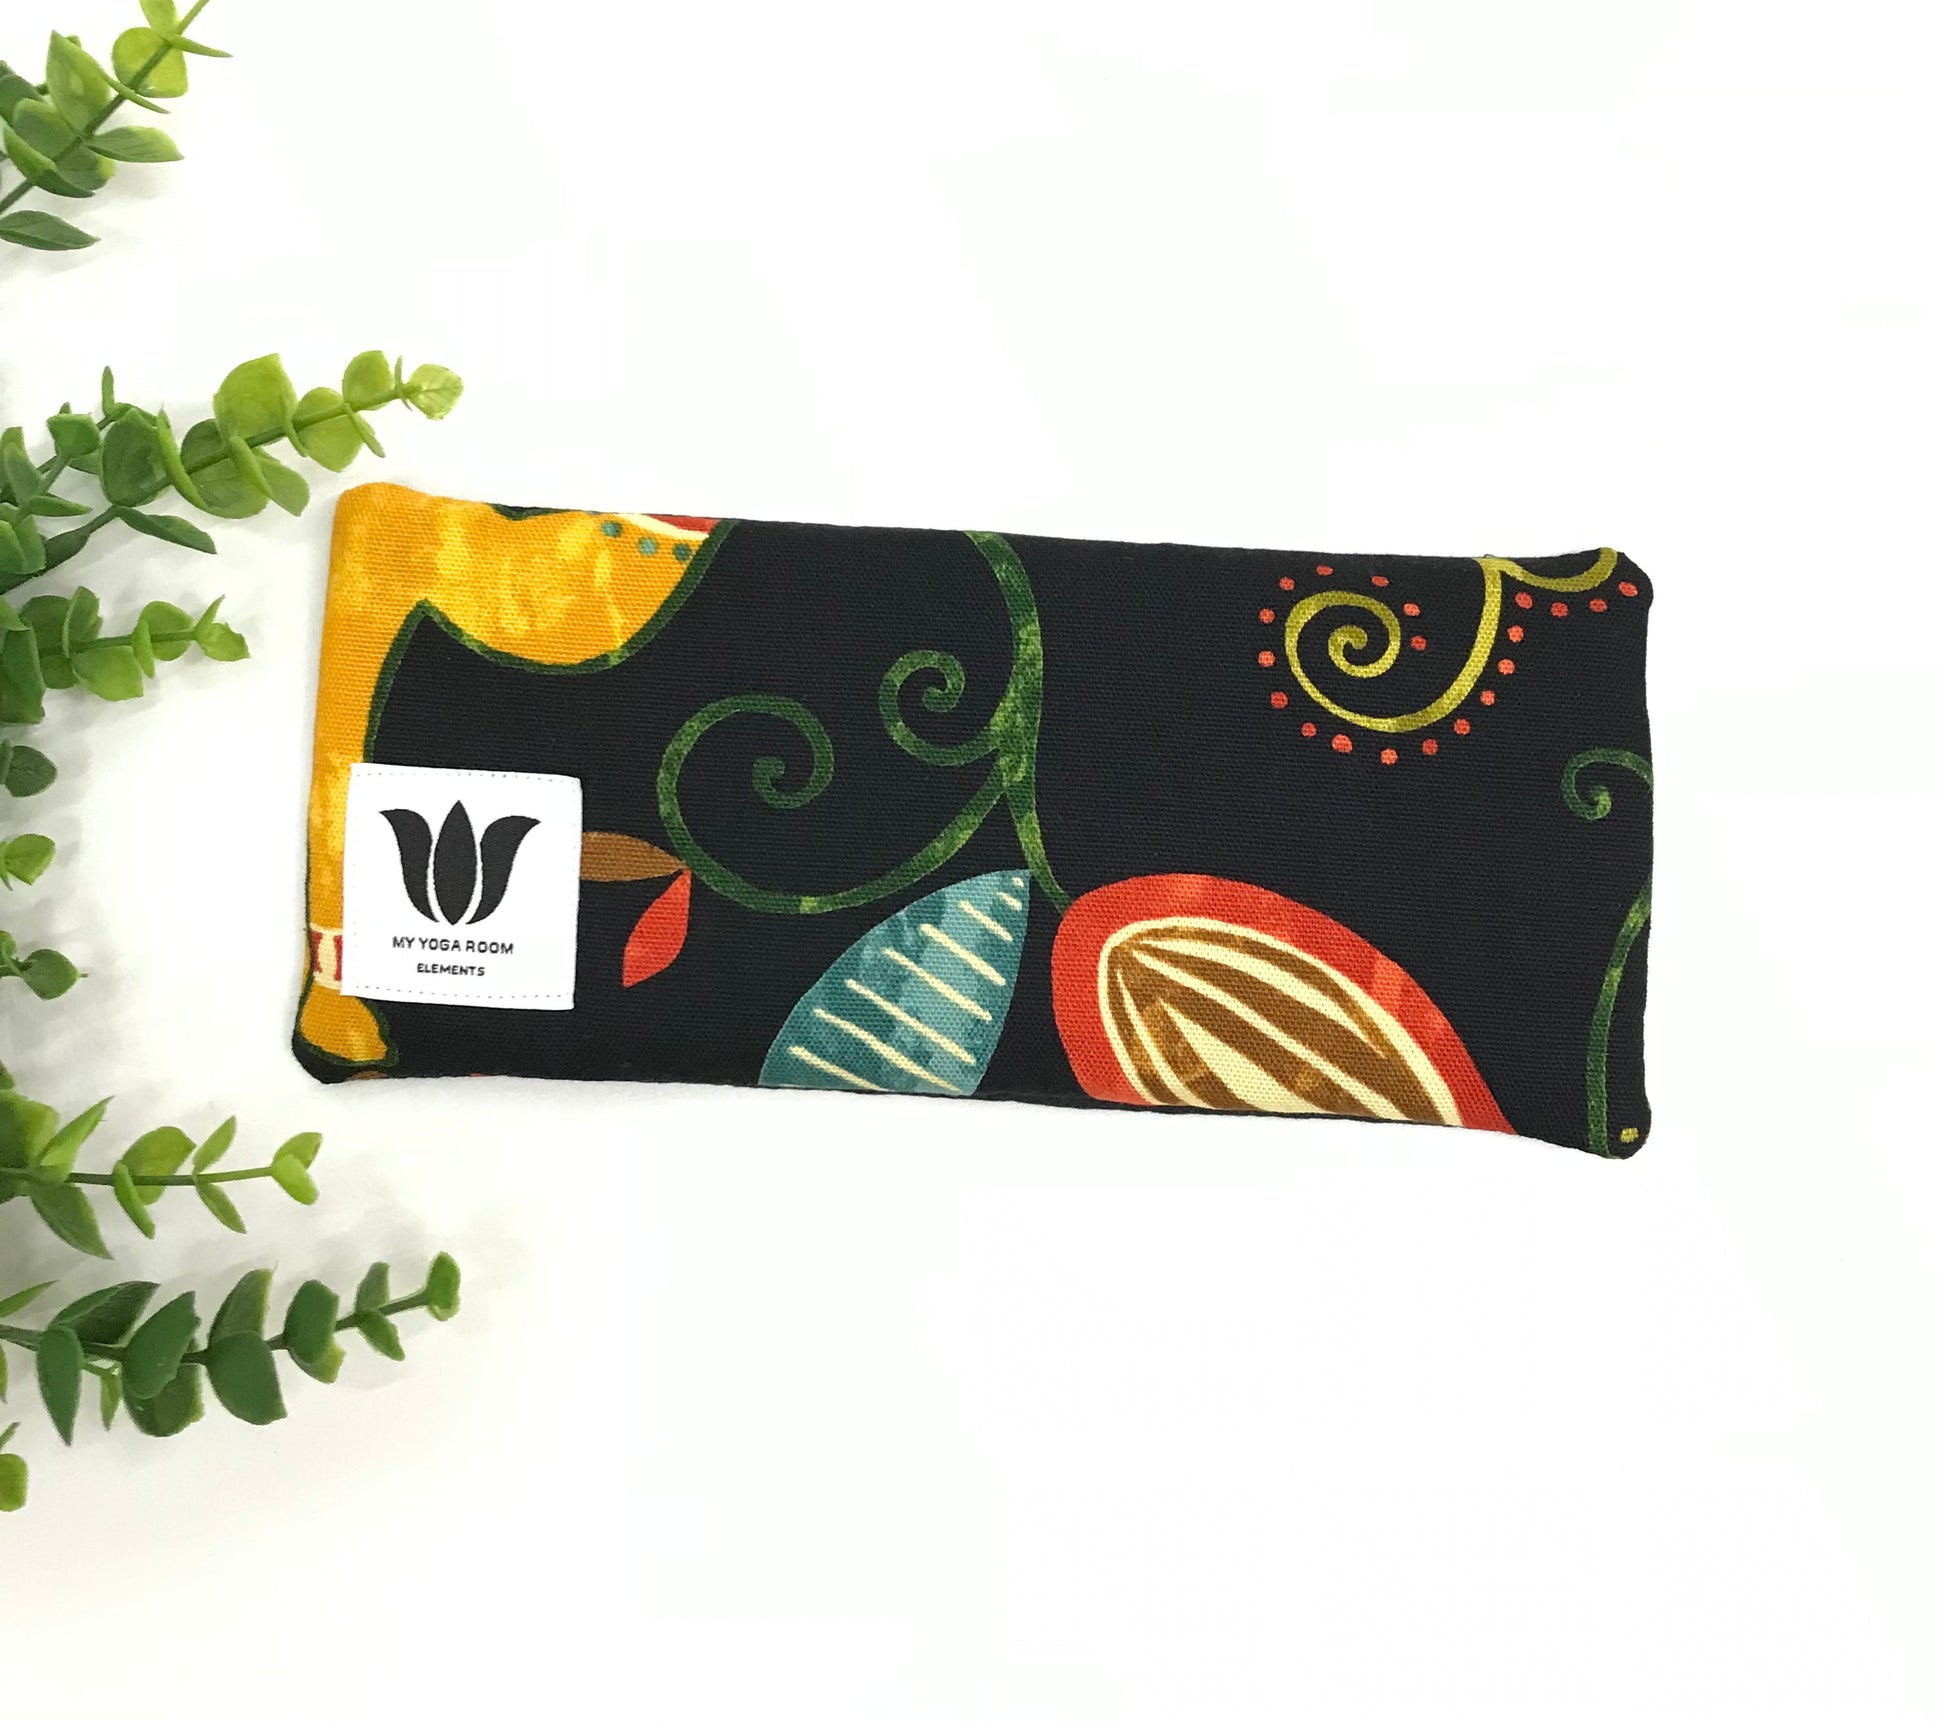 Yoga eye pillow, unscented, therapeutically weighted to soothe eye strain and stress or enhance your savasana. Handcrafted in Canada by My Yoga Room Elements. Rainbow black nature print and bamboo fabric.